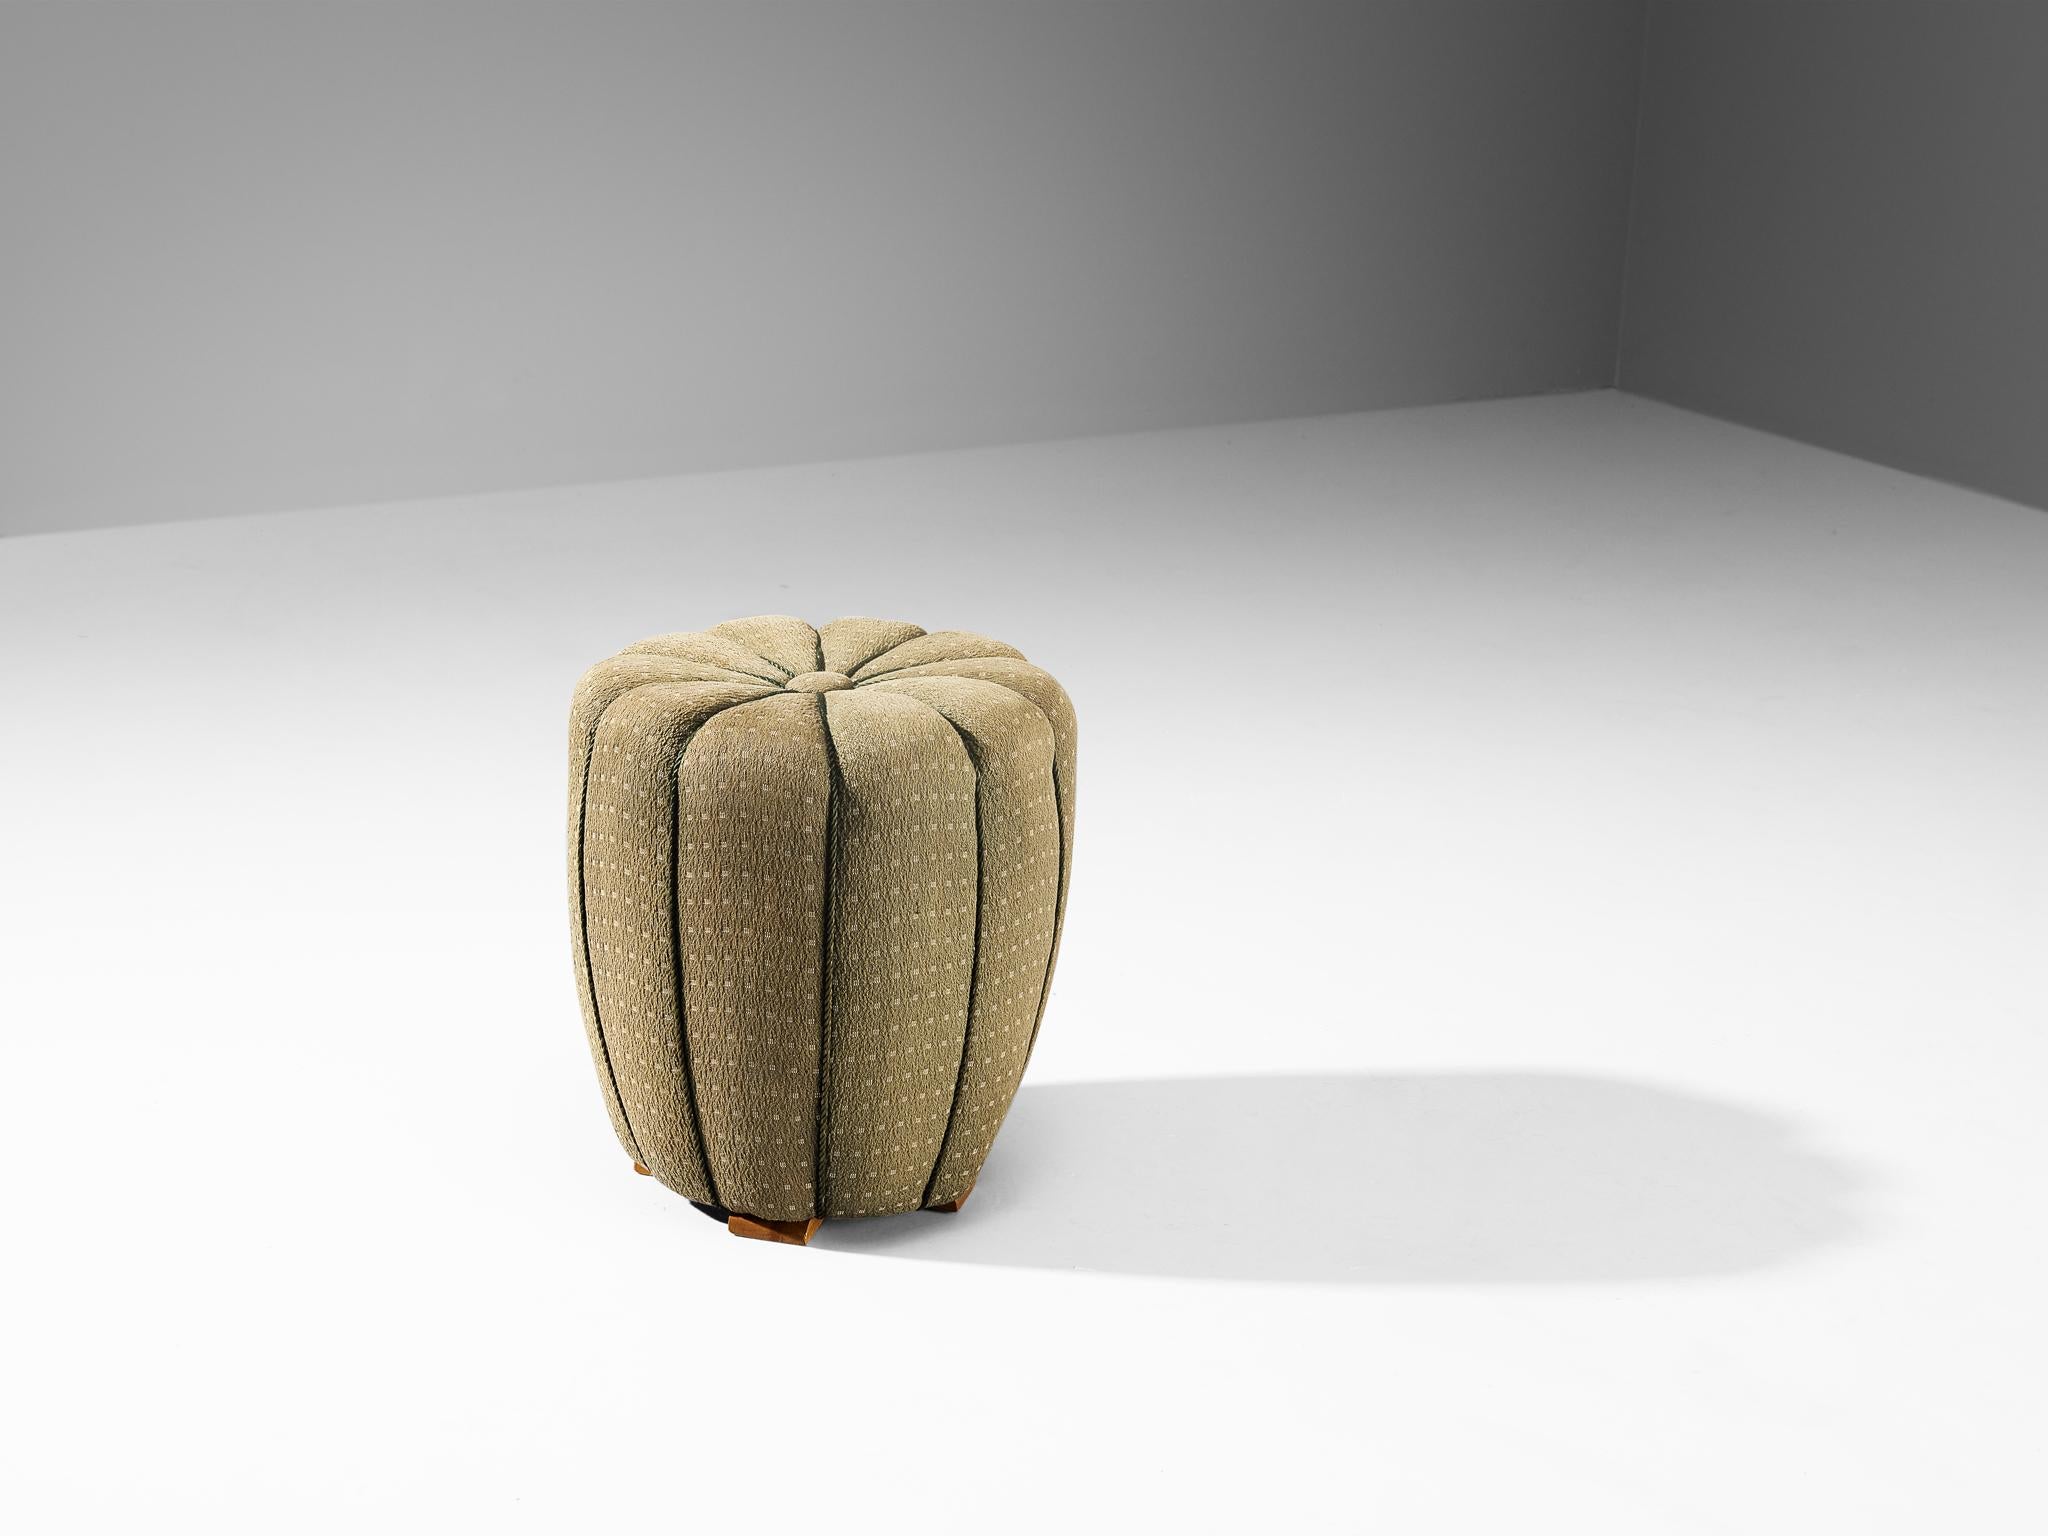 Jindrich Halabala for UP Závody, footstool, tabouret, ottoman, fabric, stained wood, Czech Republic, 1930s.

This poetic pouf is designed in the 1930s when the Art Deco Period was at its highest point and distinguishes itself by means of artistic